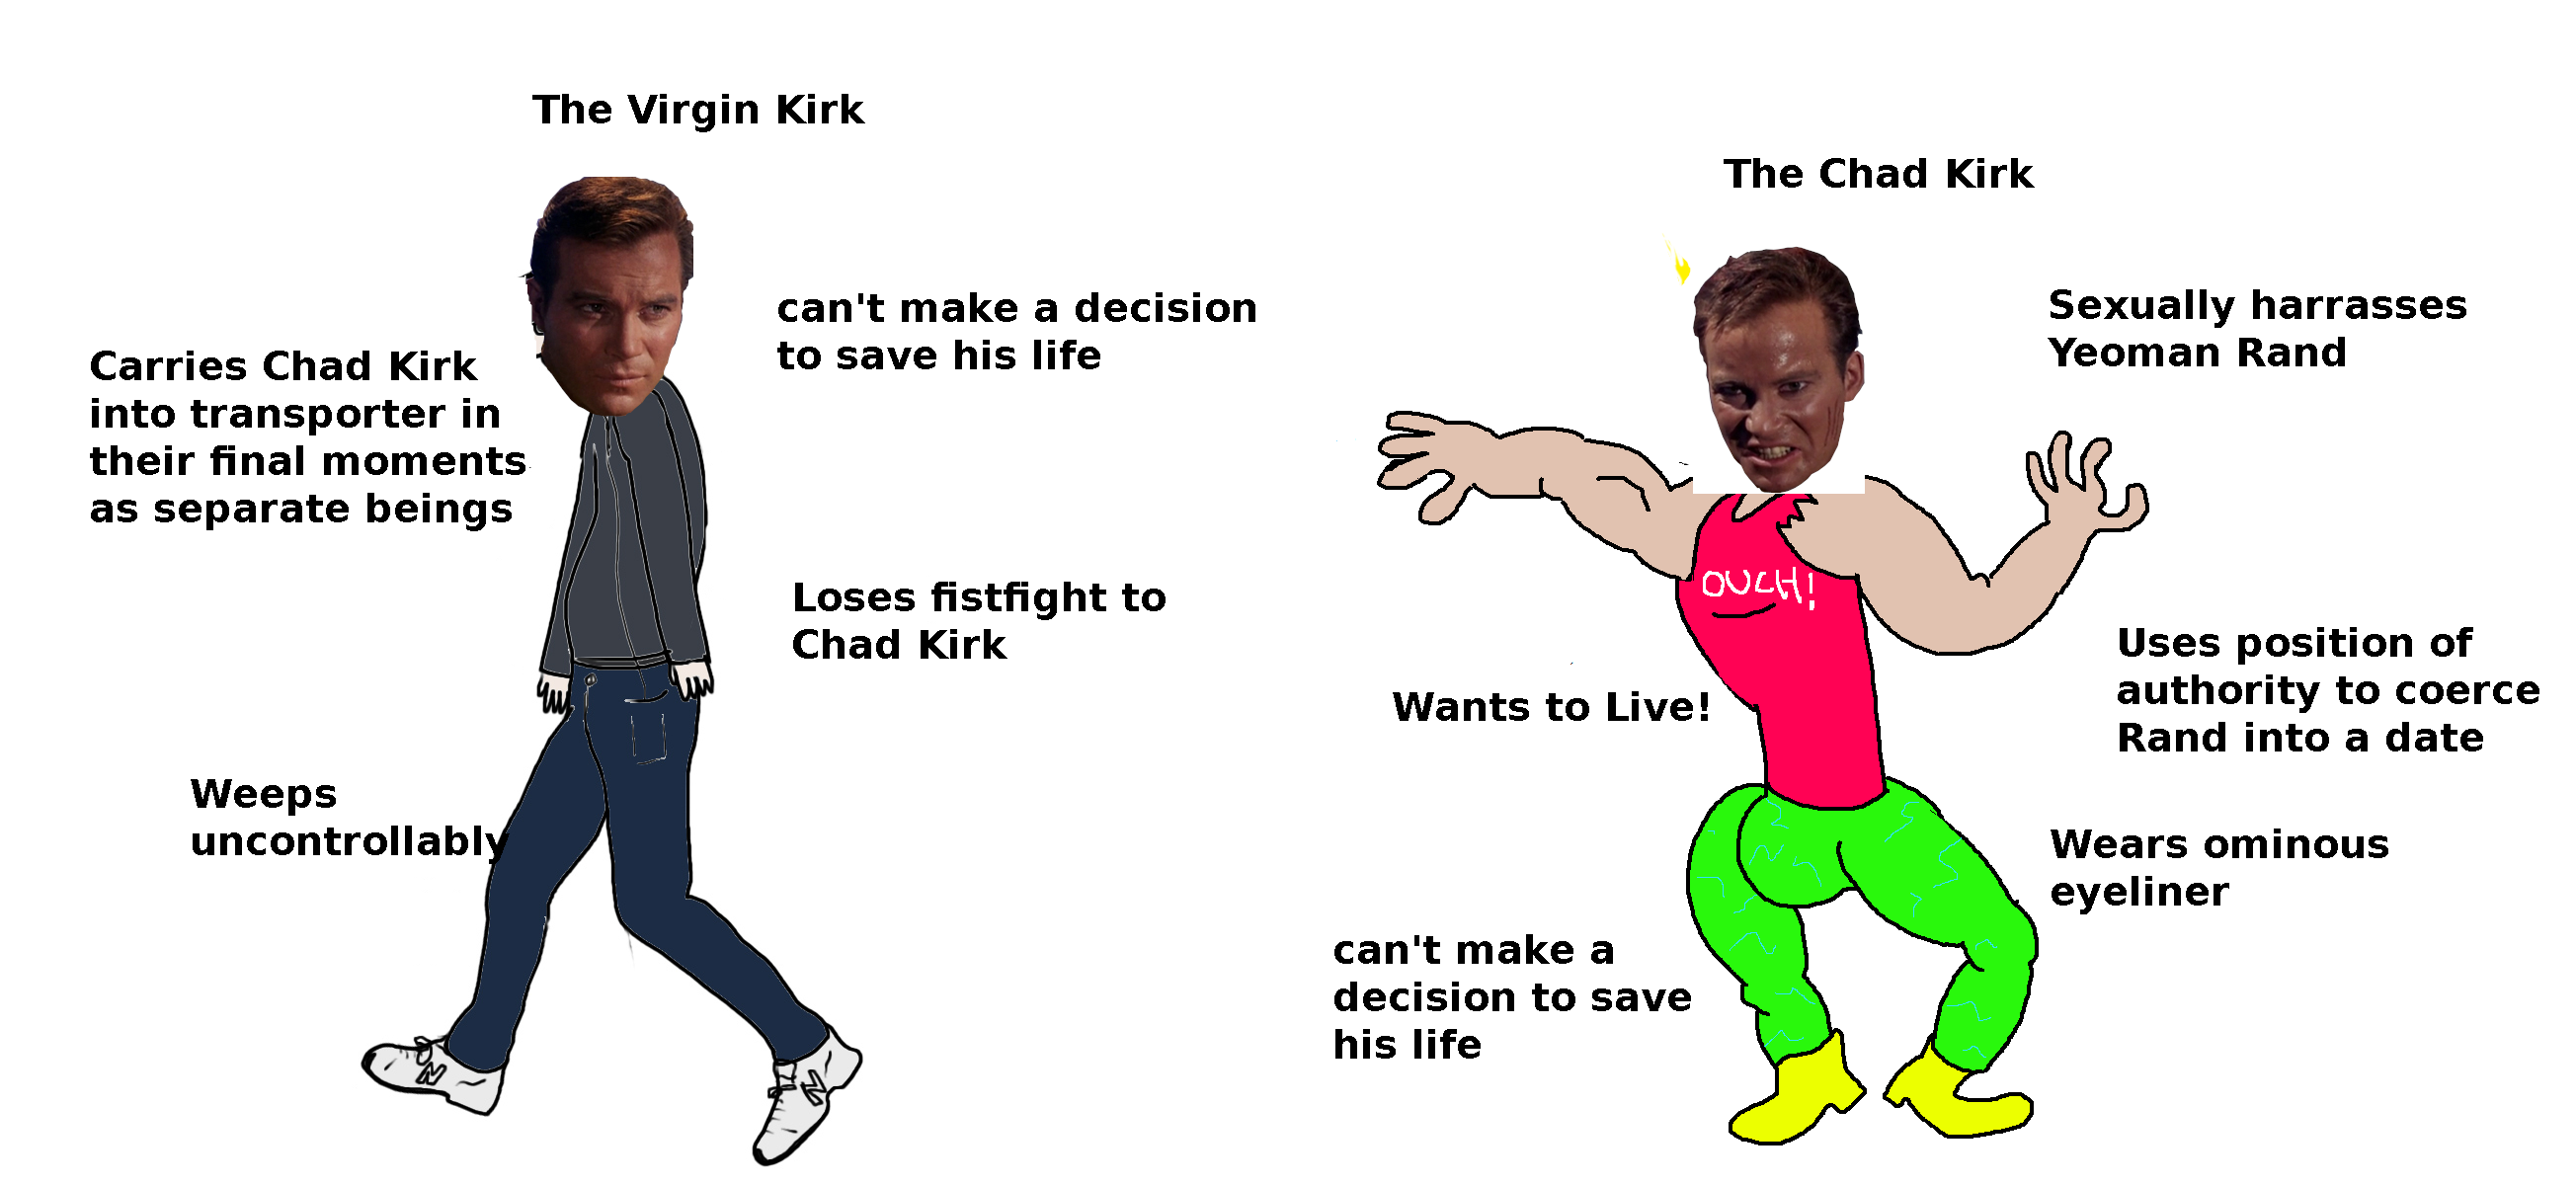 The Virgin Kirk and the Chad Kirk